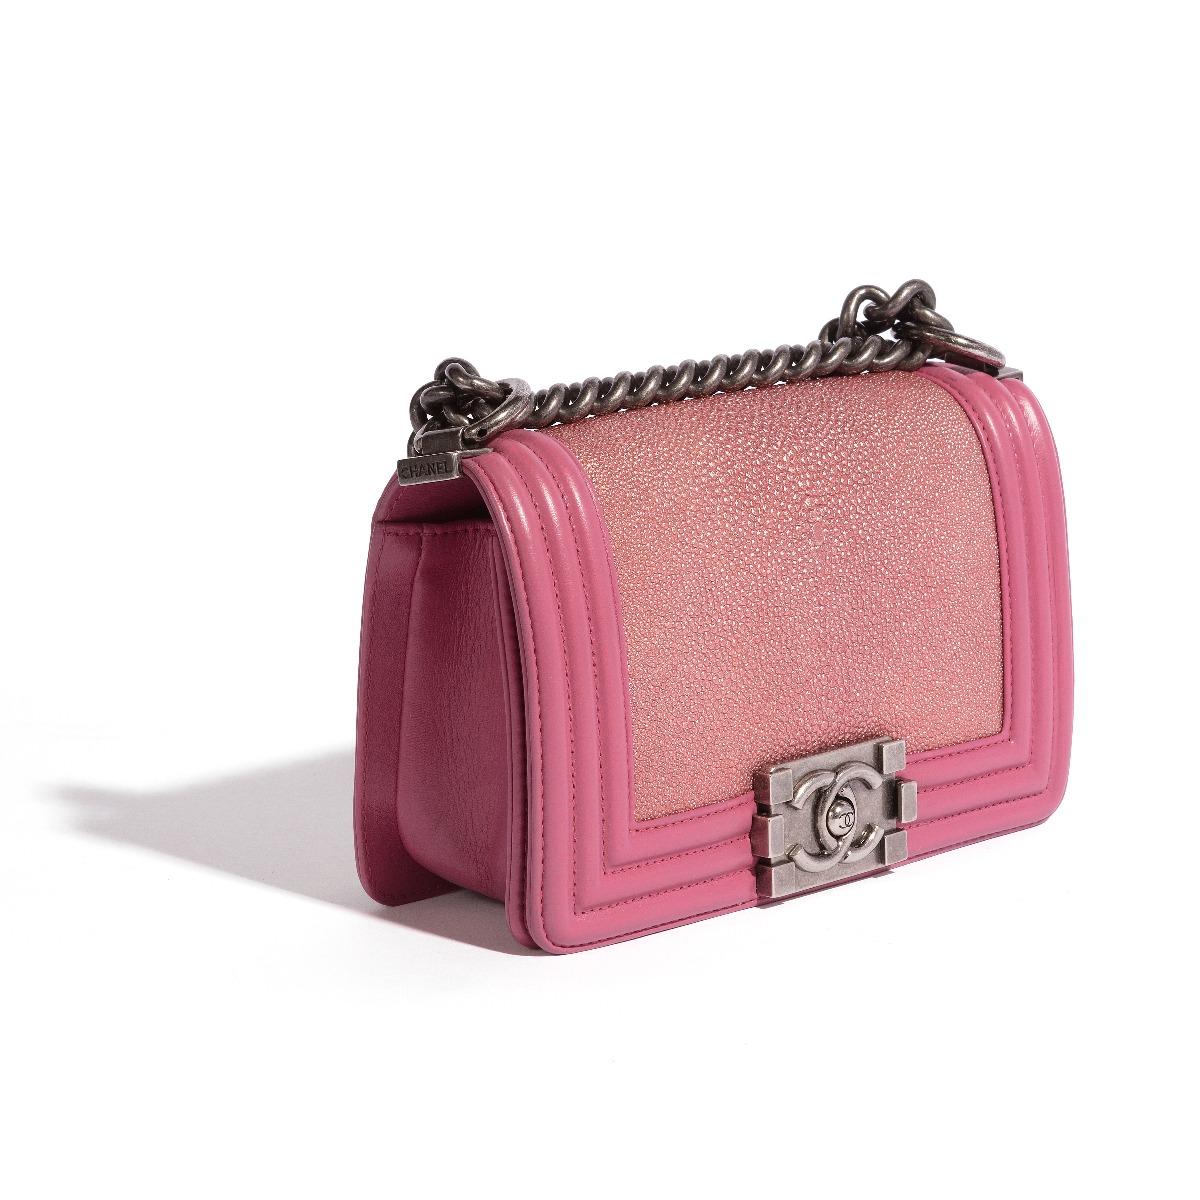 Chanel Pink Leather Le Boy Bag In Excellent Condition For Sale In London, GB